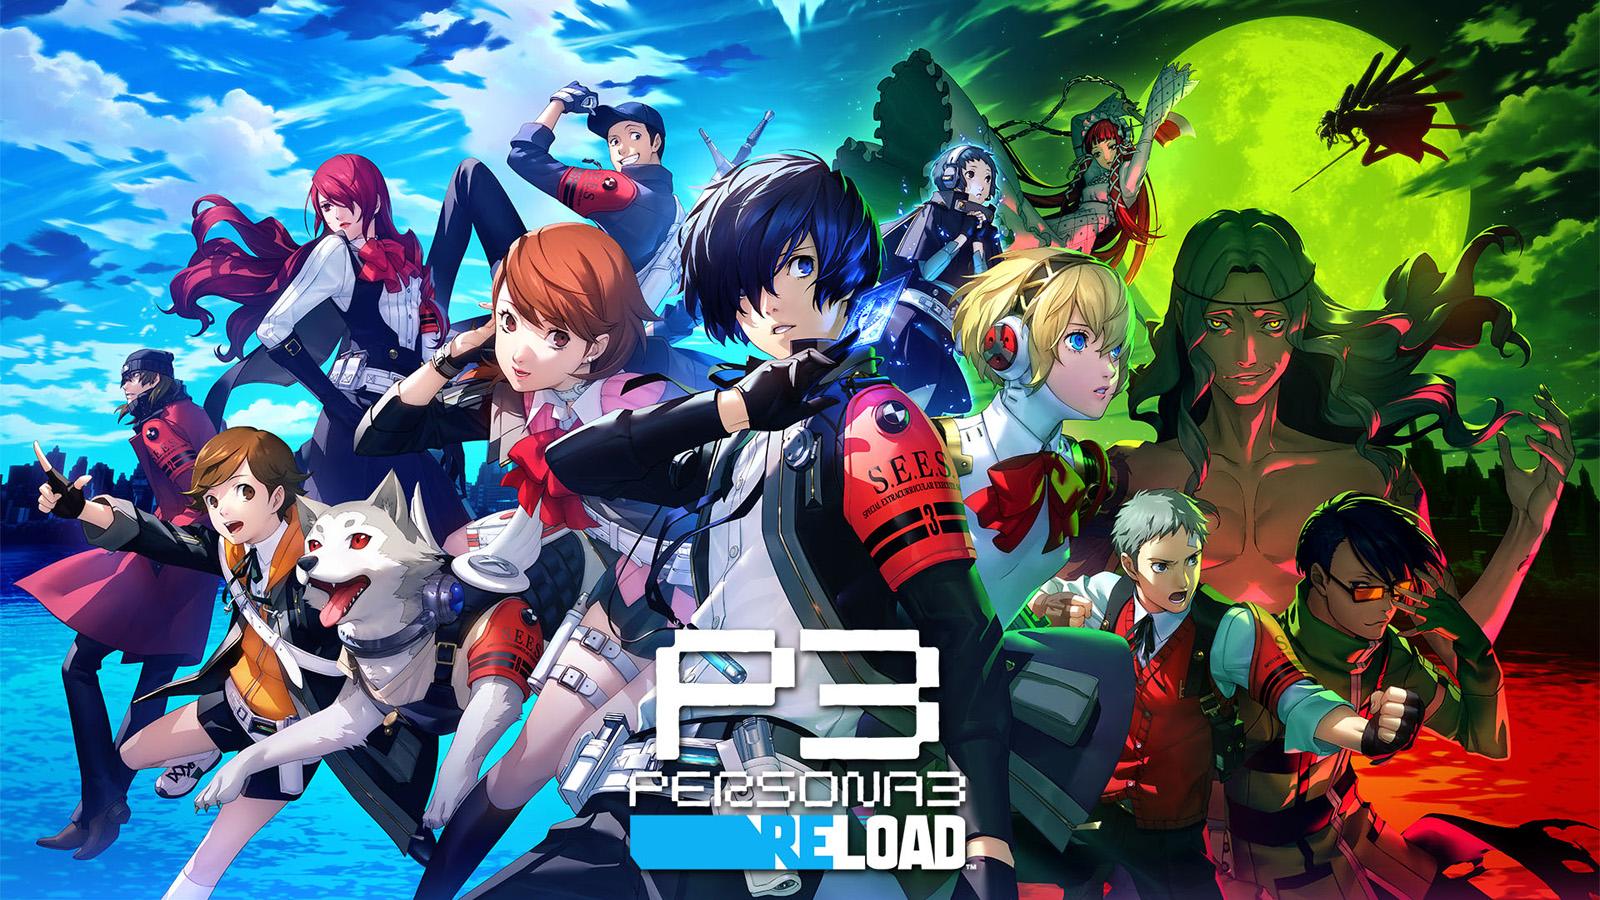 Key art for Persona 3 Reload